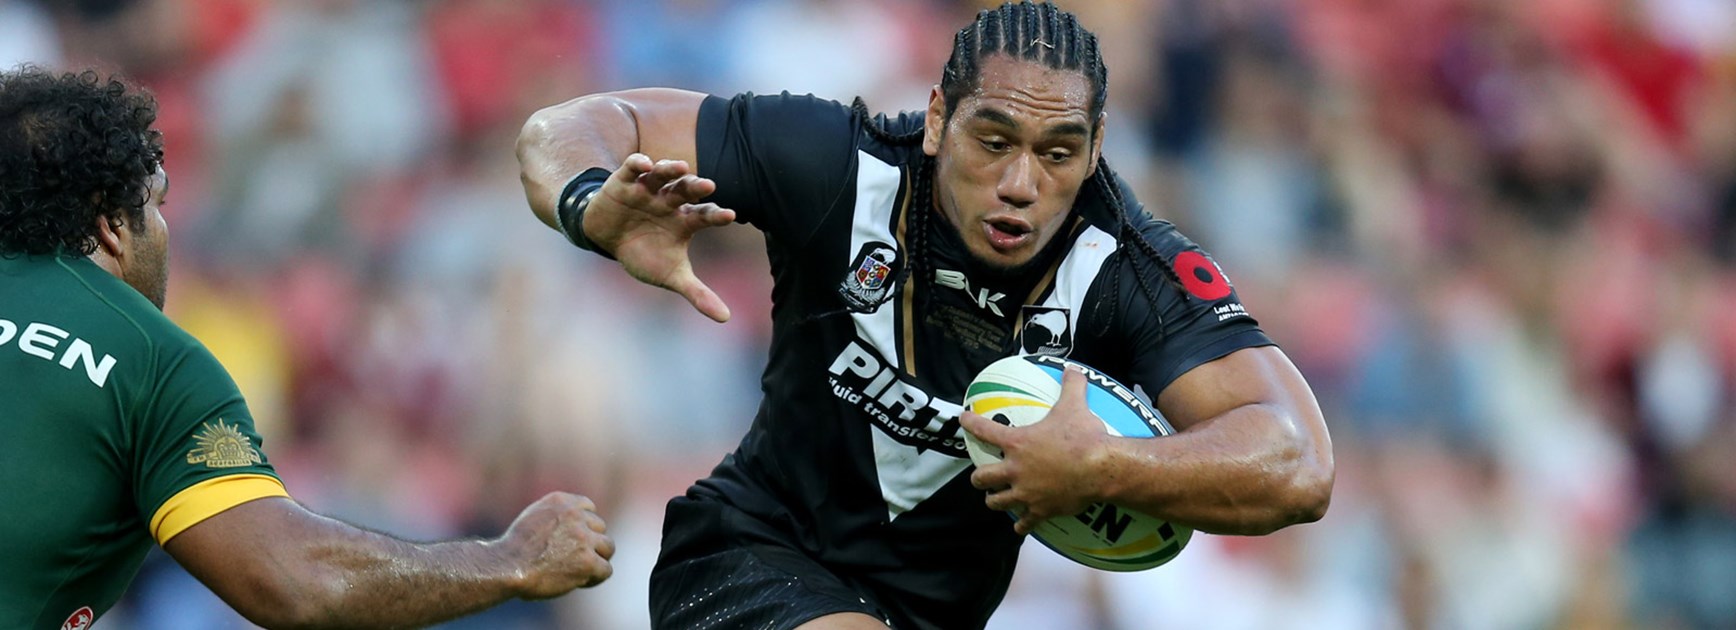 Manly-bound forward Martin Taupau will start from the bench for the Kiwis in the first Test against England.